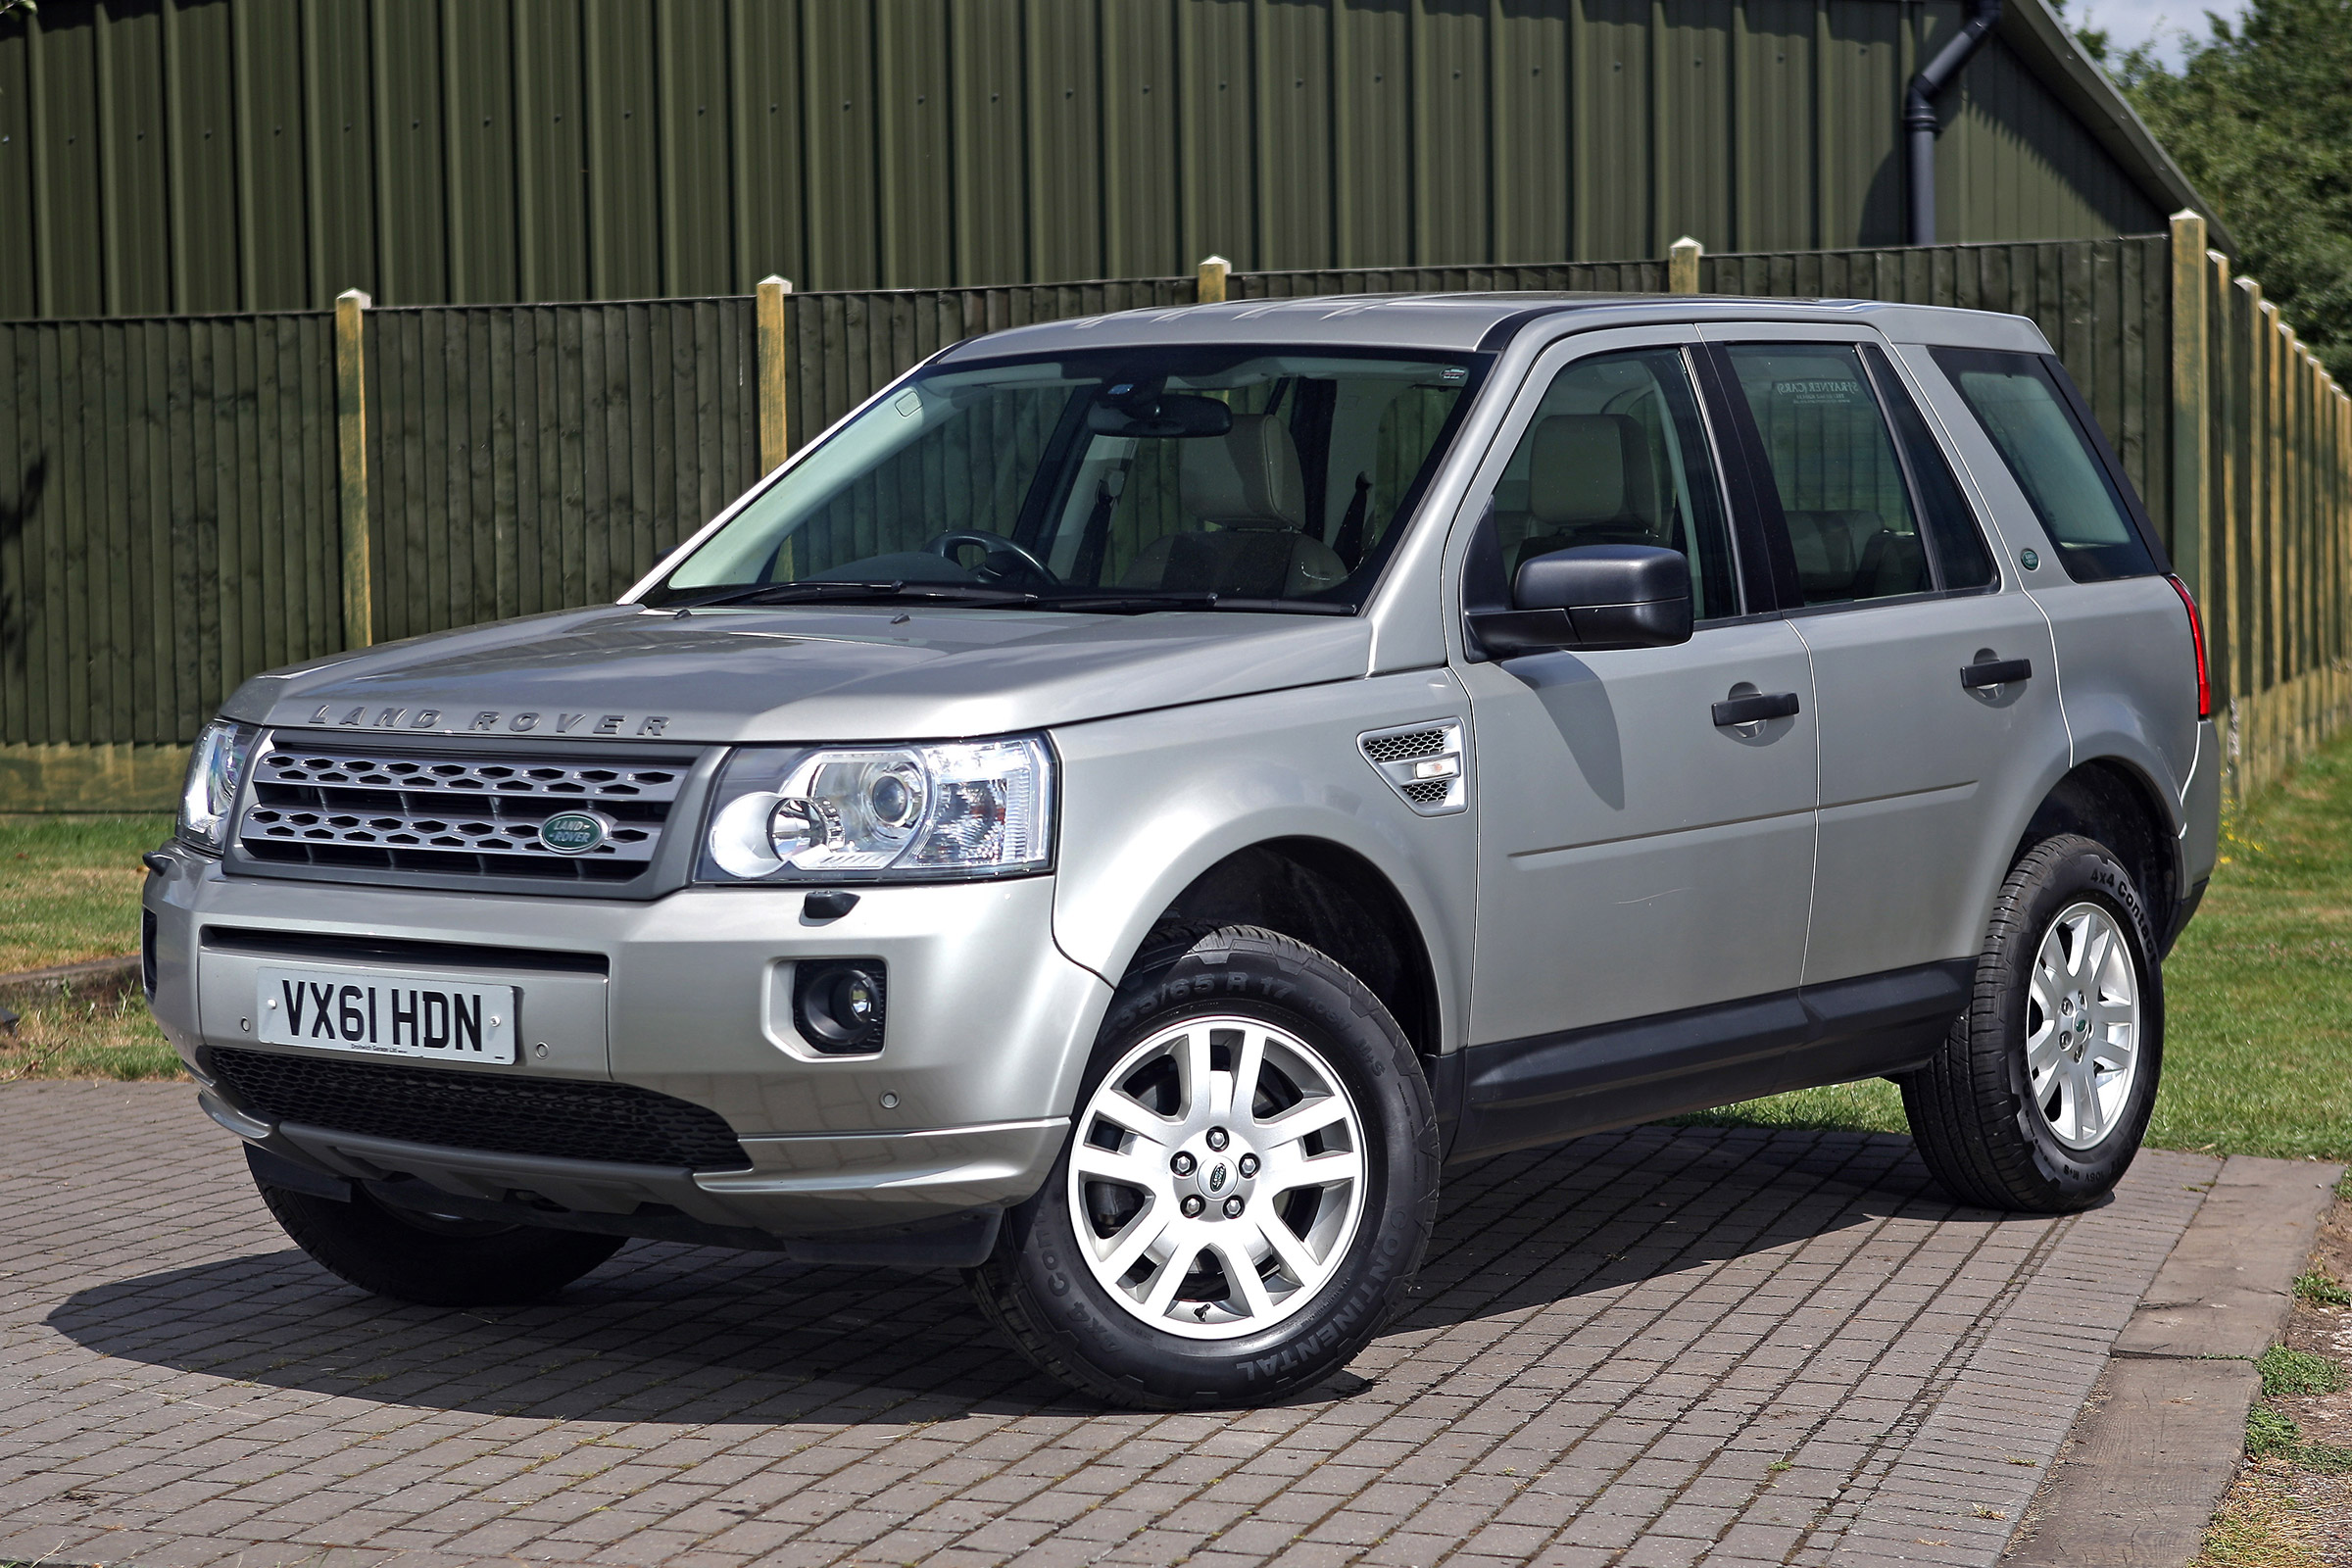 Used Land Rover Freelander 2 review Auto Express